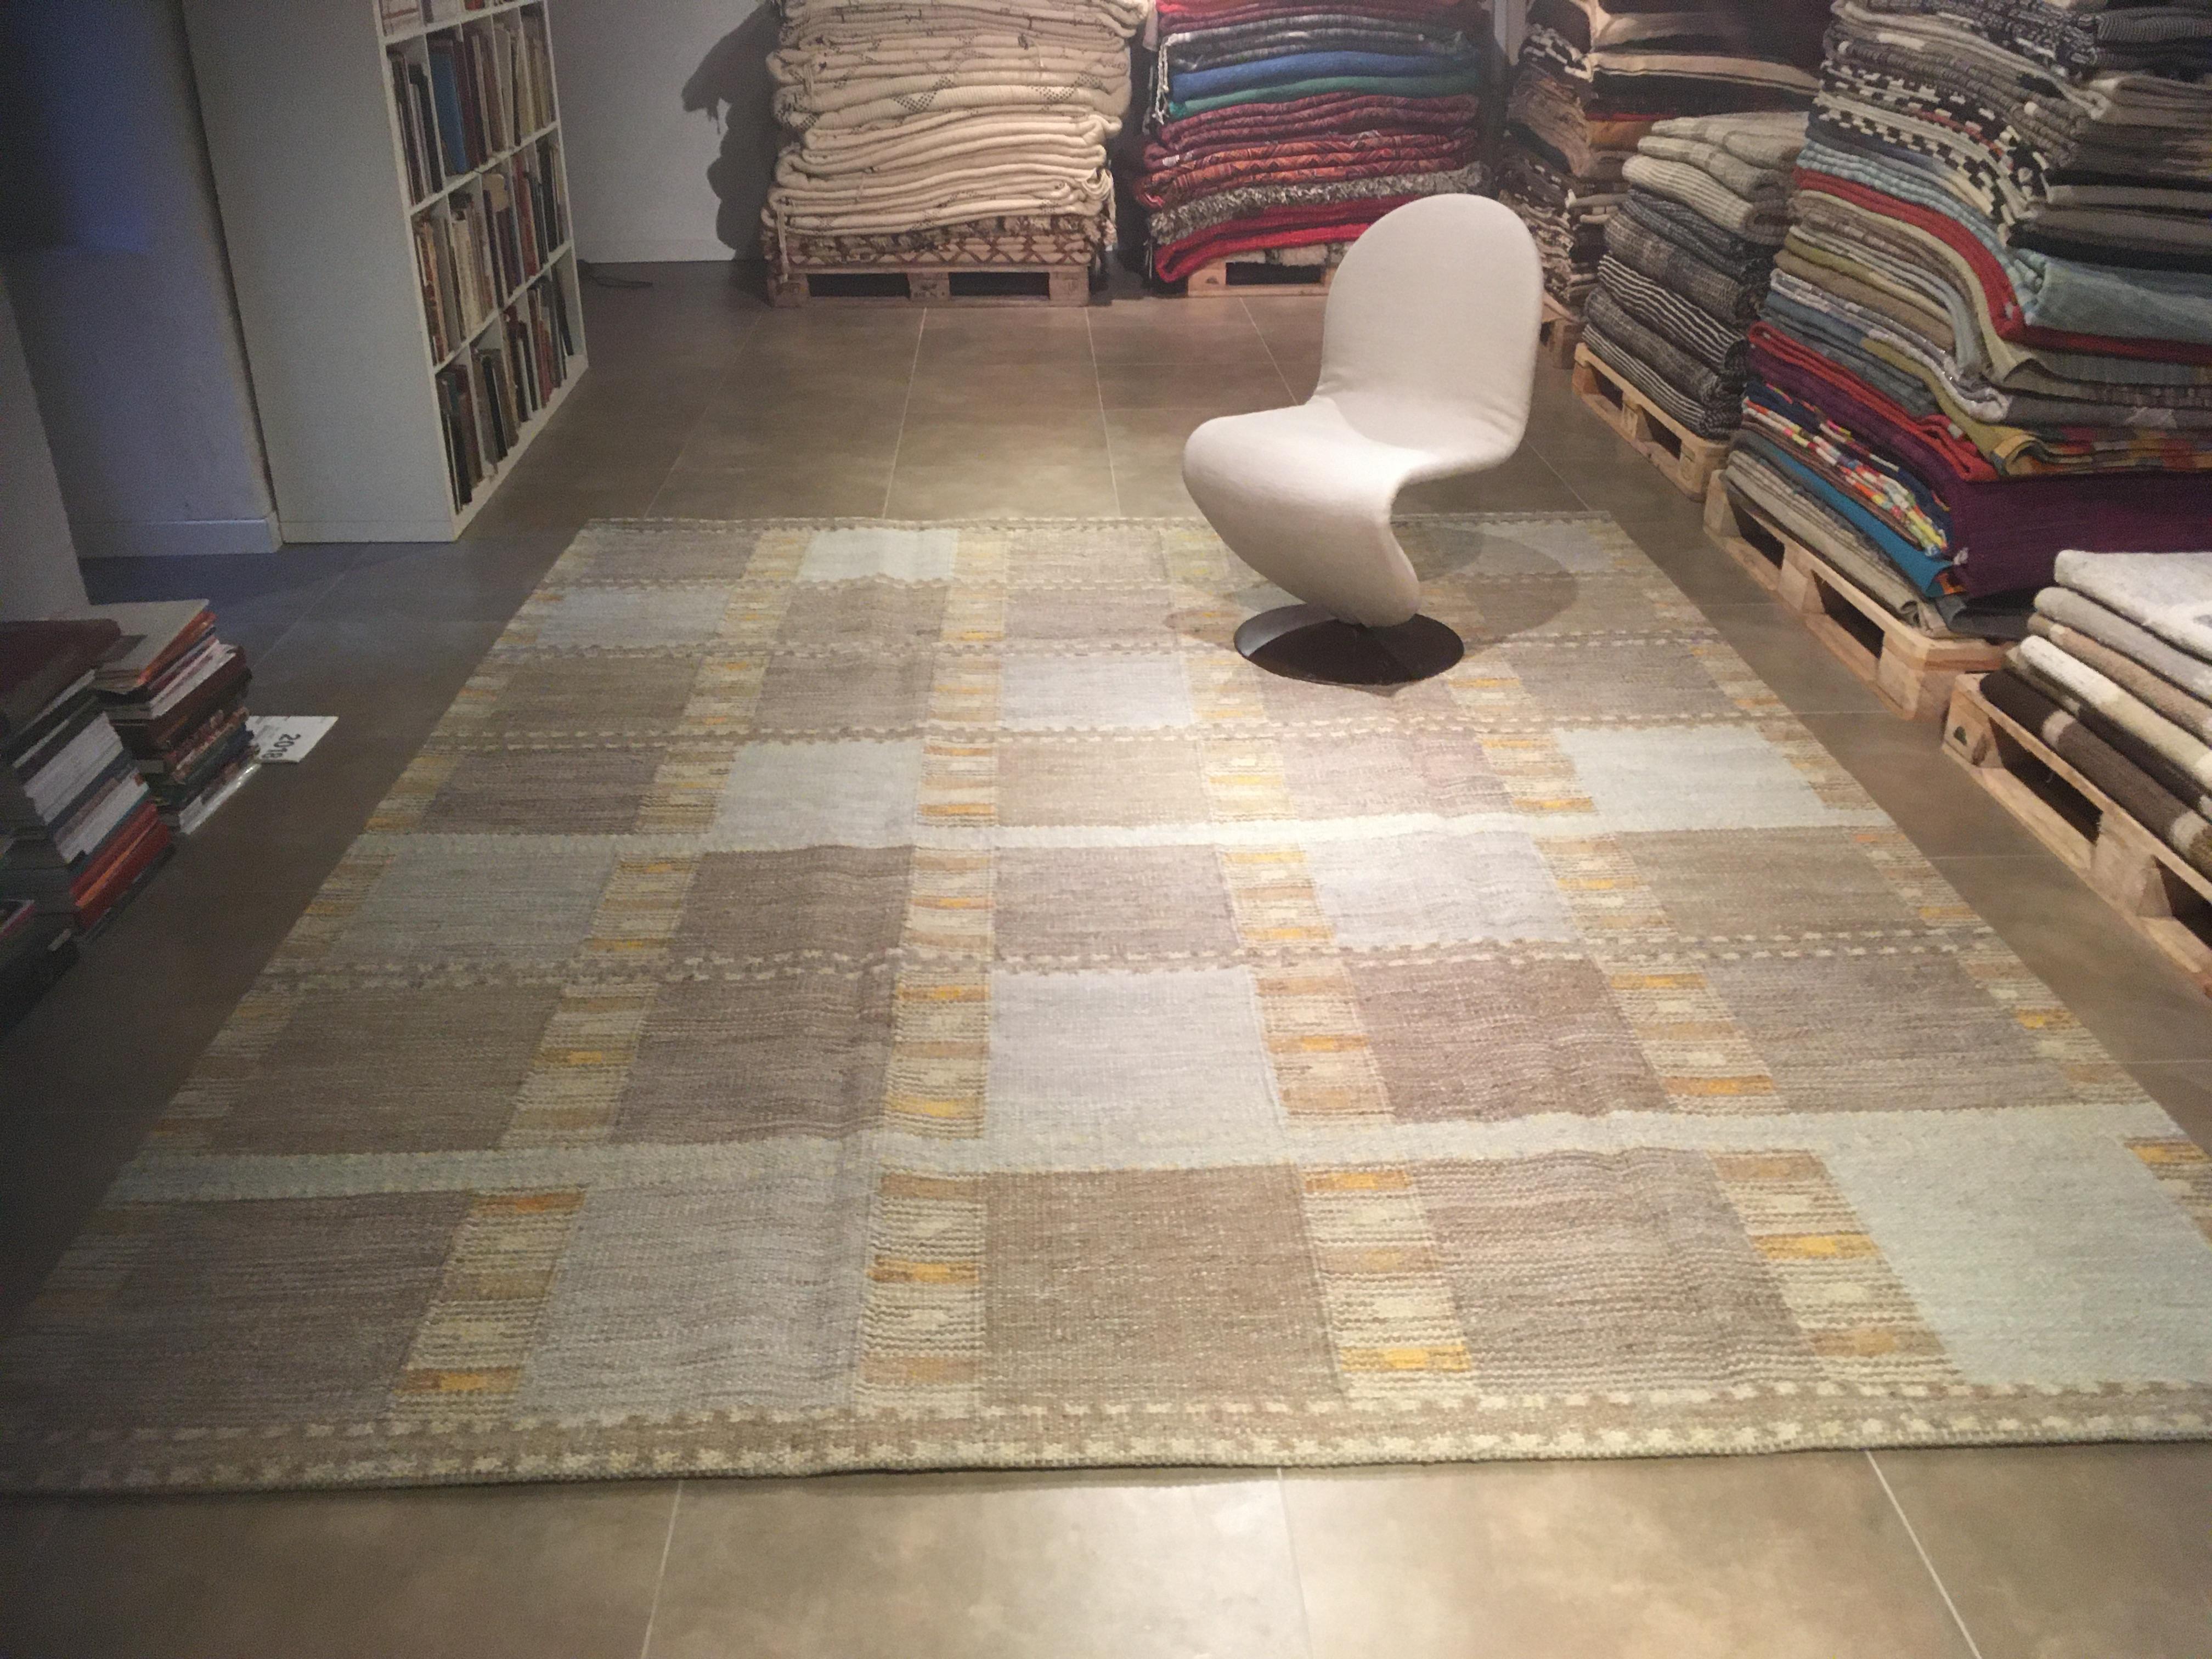 Inspired by Mid-Century Modern Swedish carpets, this Kilim is part of our contemporary collection of textured flat weaves where the material is employed in such a way as to create a sturdy rug that can be beautifully juxtaposed in today's interiors.